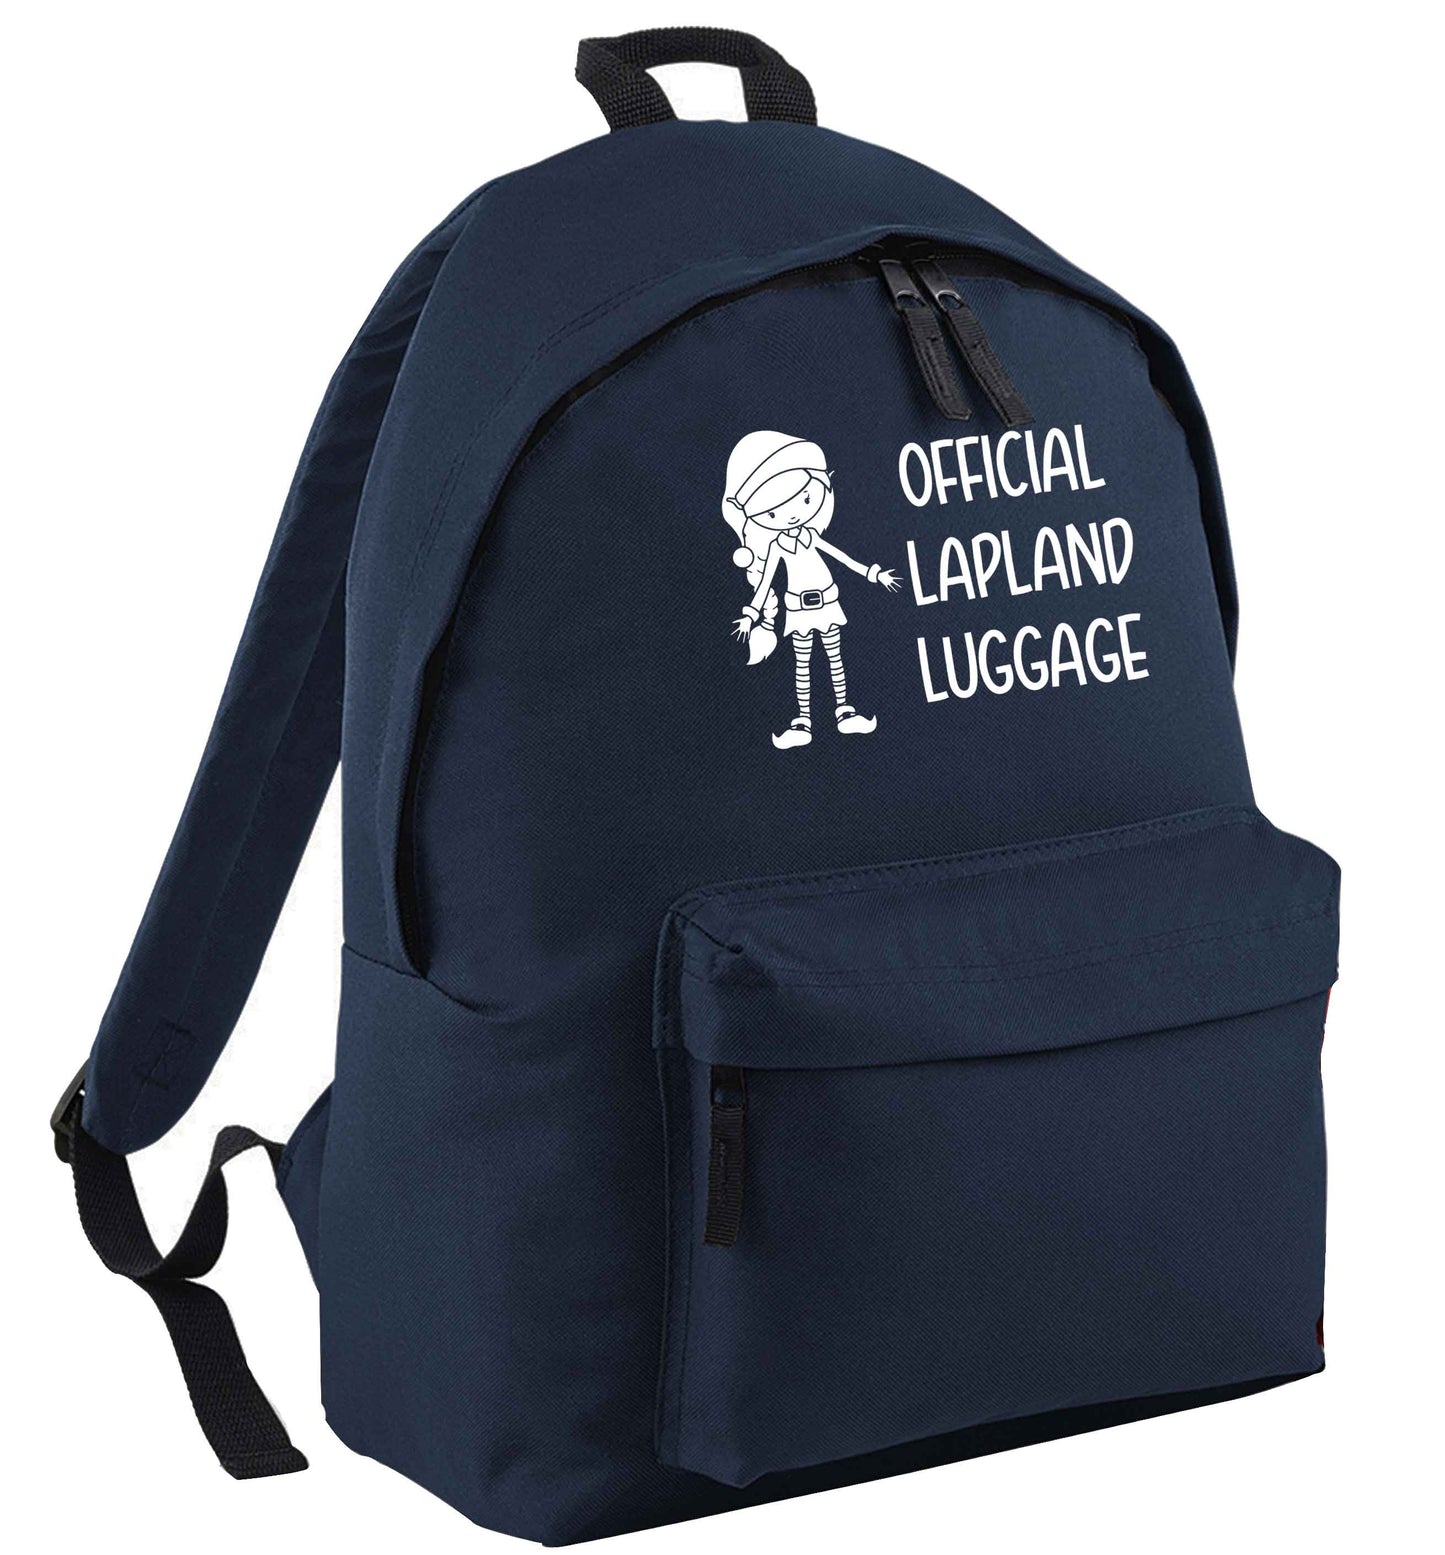 Official lapland luggage - Elf snowflake navy adults backpack